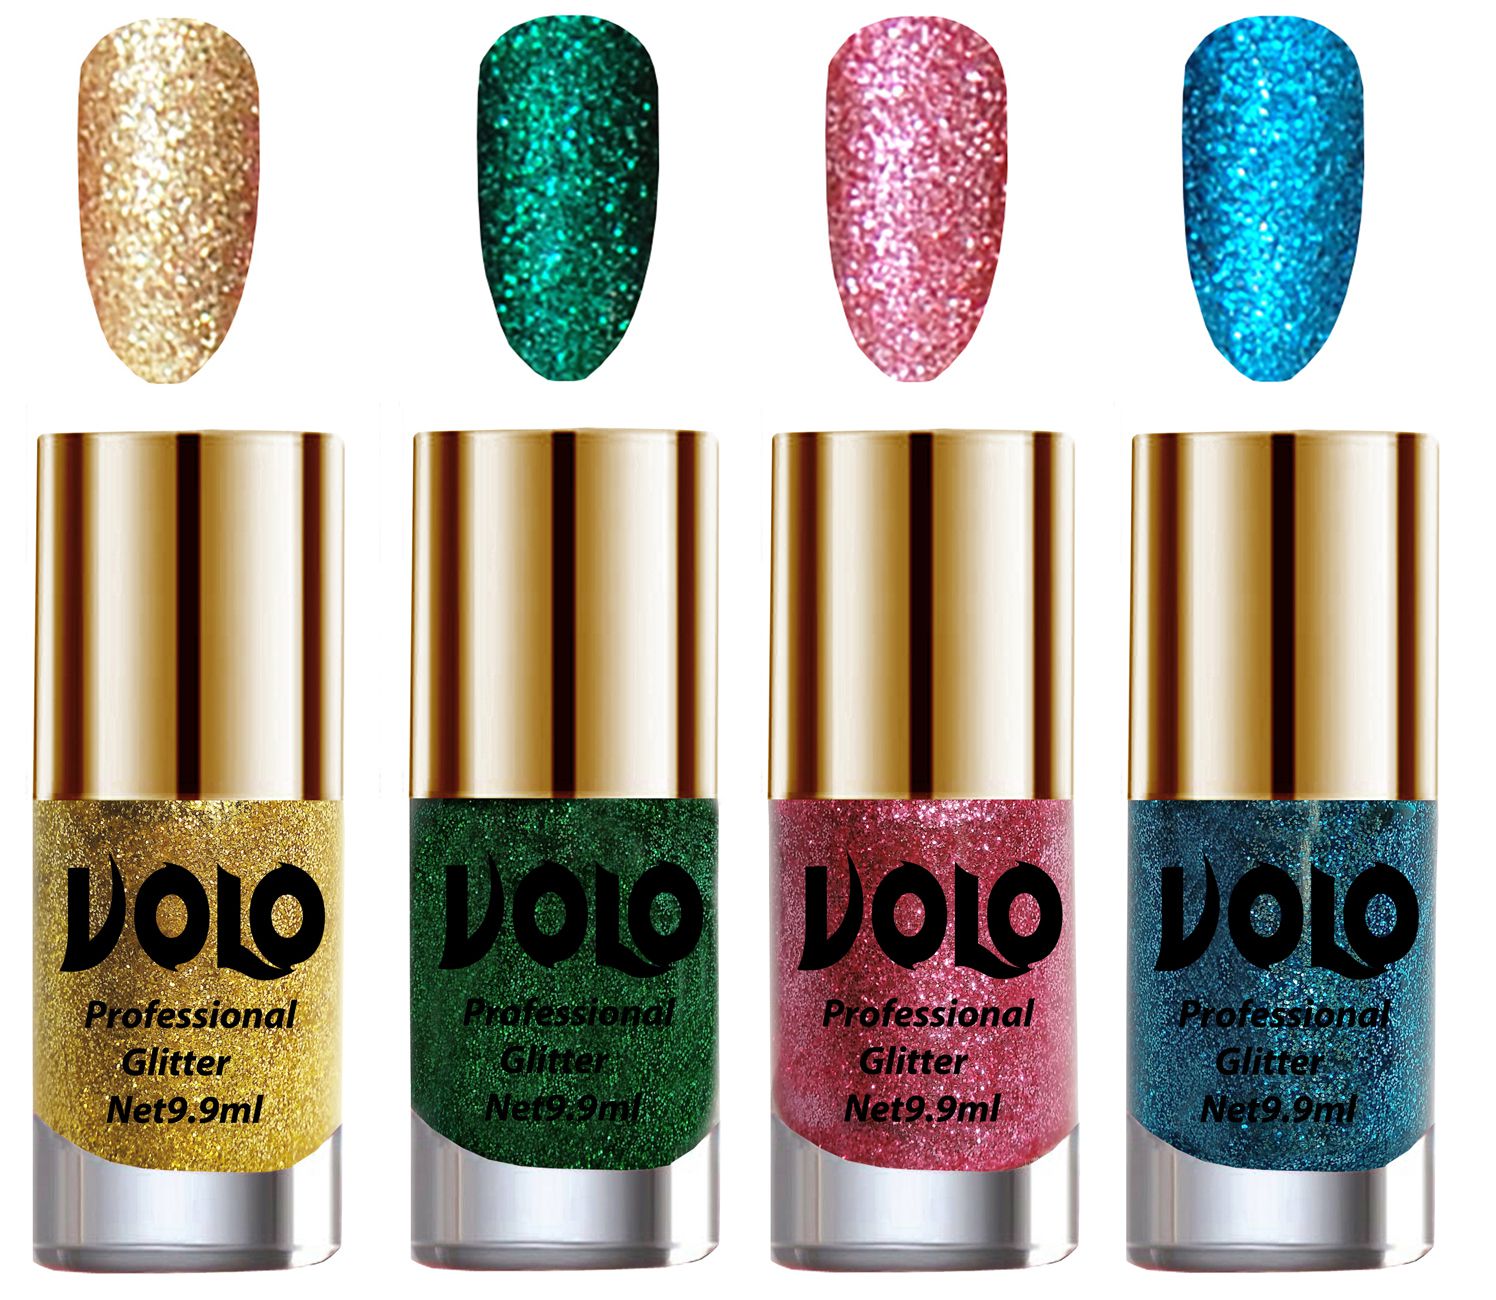     			VOLO Professionally Used Glitter Shine Nail Polish Gold,Green,Pink Blue Pack of 4 39 mL